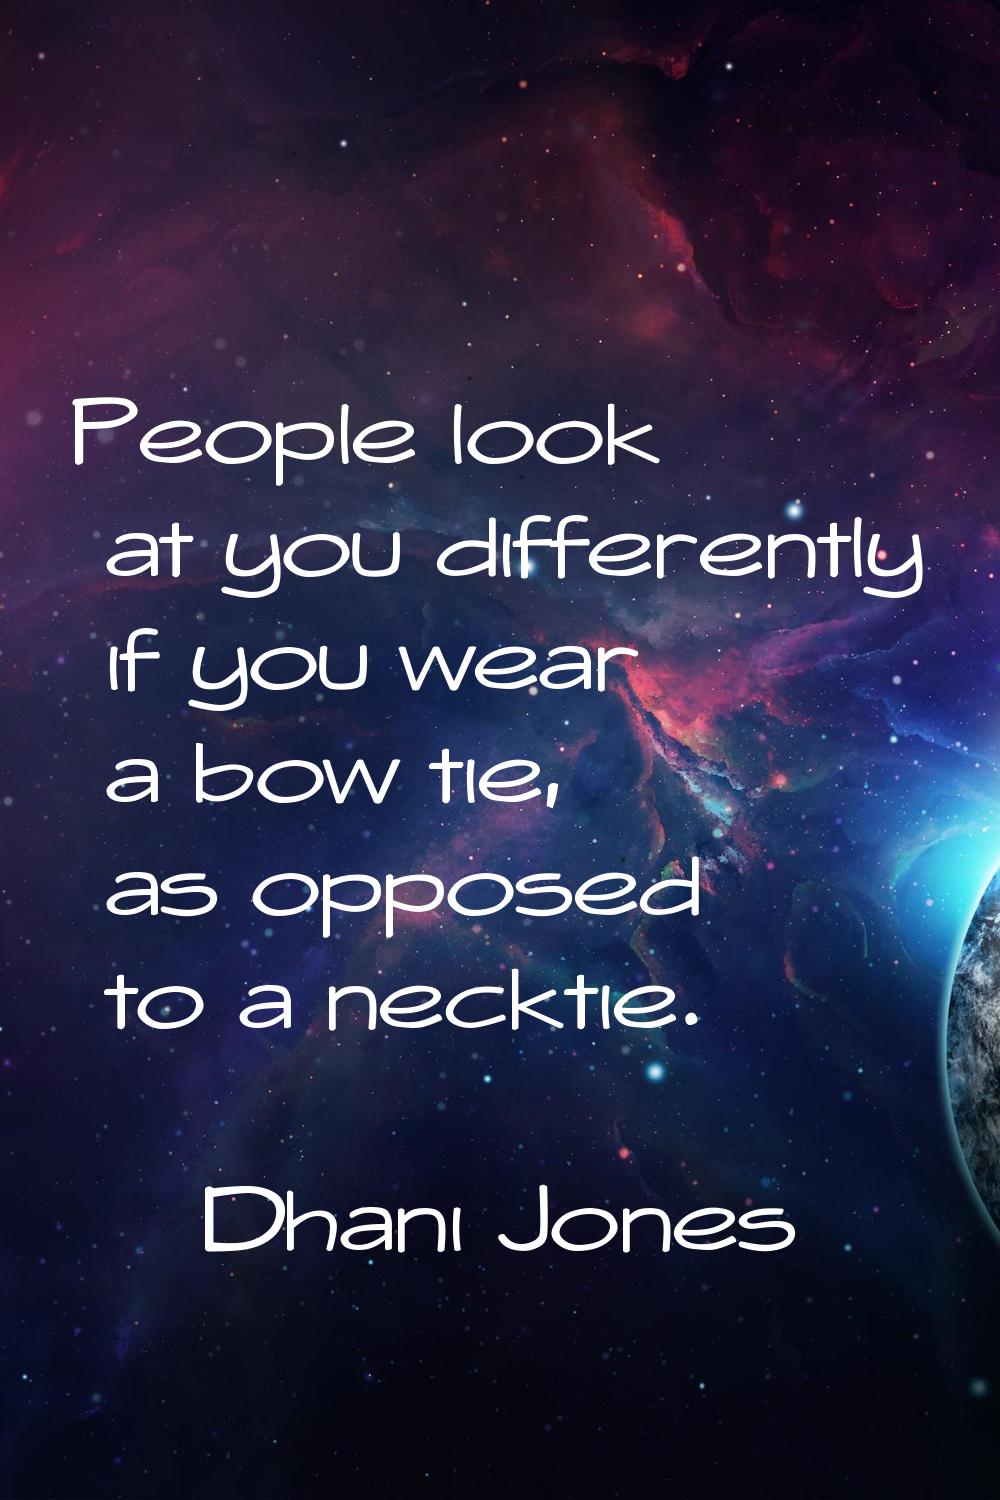 People look at you differently if you wear a bow tie, as opposed to a necktie.